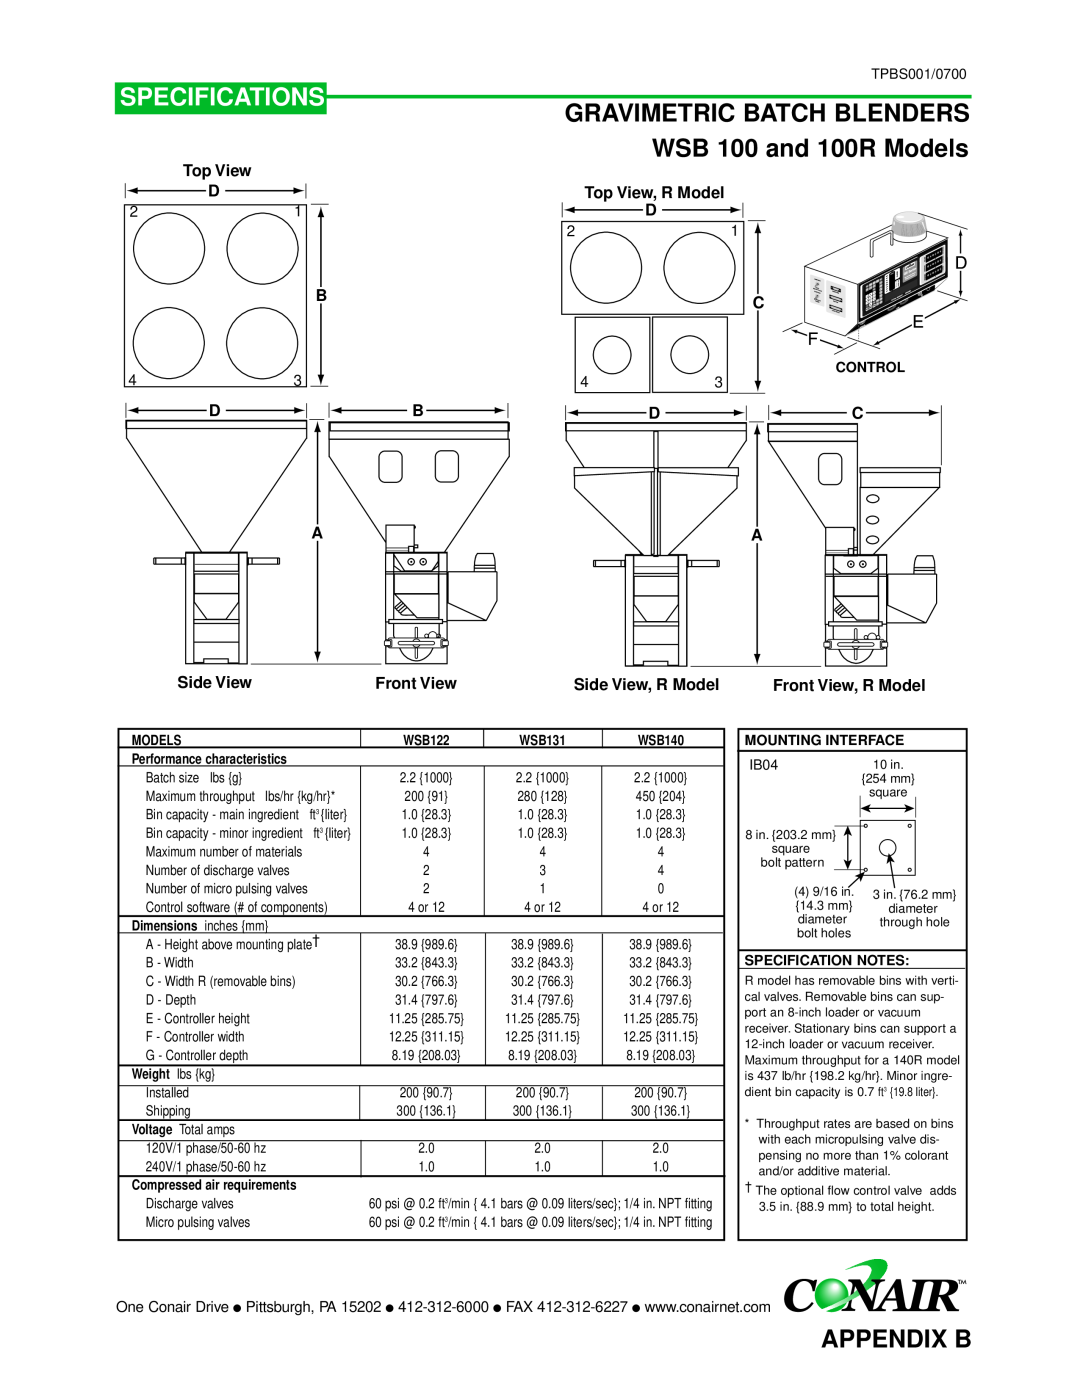 Conair GB/ WSB manual Specifications, Appendix B, Top View D, Top View, R Model D, Front View, Side View, R Model 